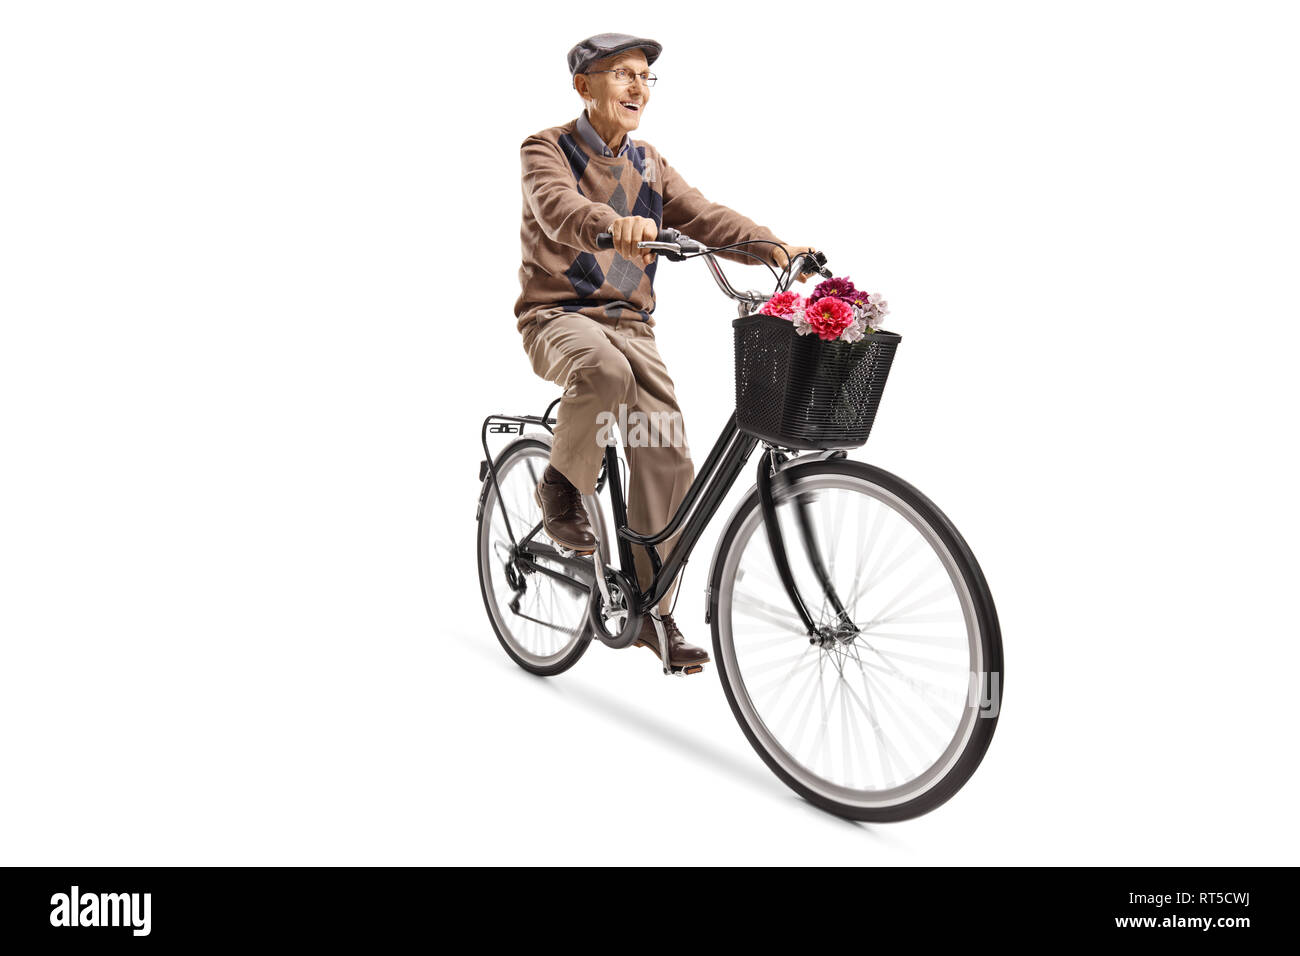 Full length shot of an elderly gentleman riding a bicycle with flowers in a basket isolated on white background Stock Photo